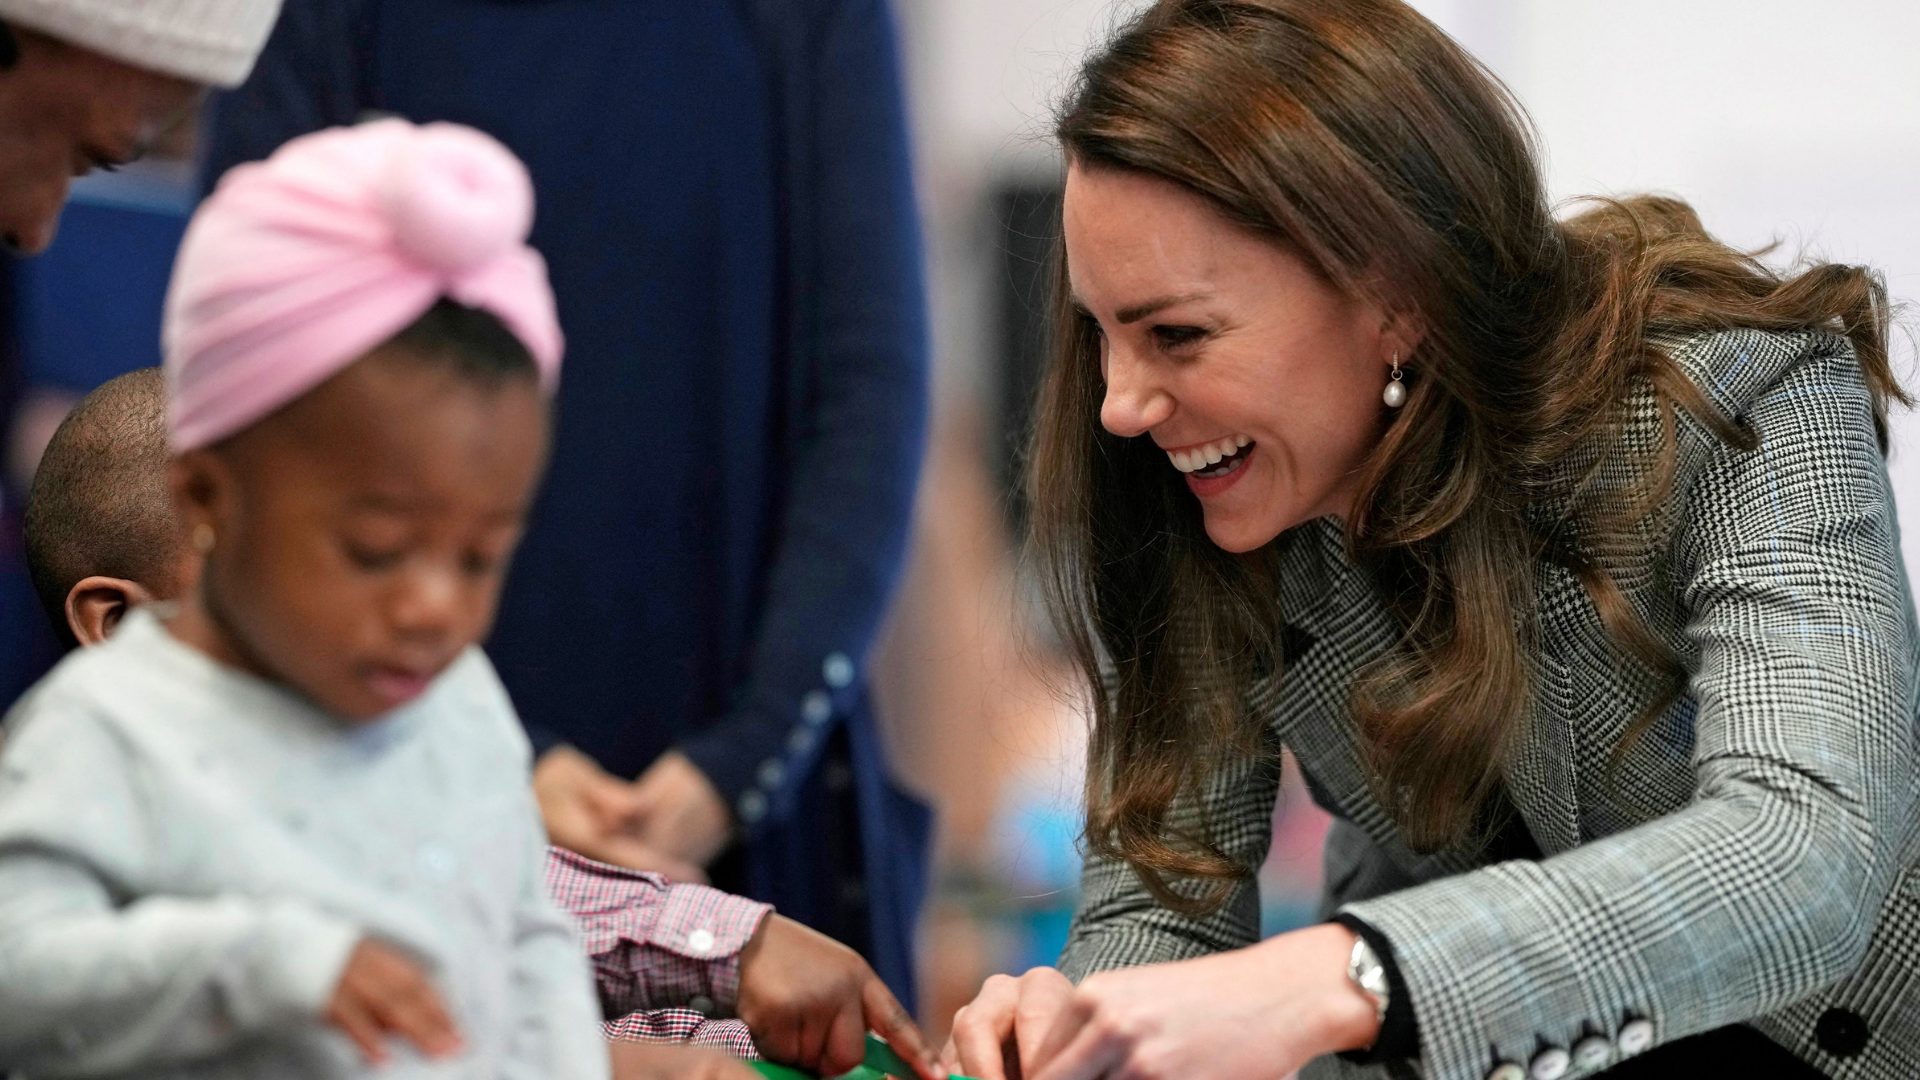 Catherine, Duchess of Cambridge shows her maternal side in touching new video